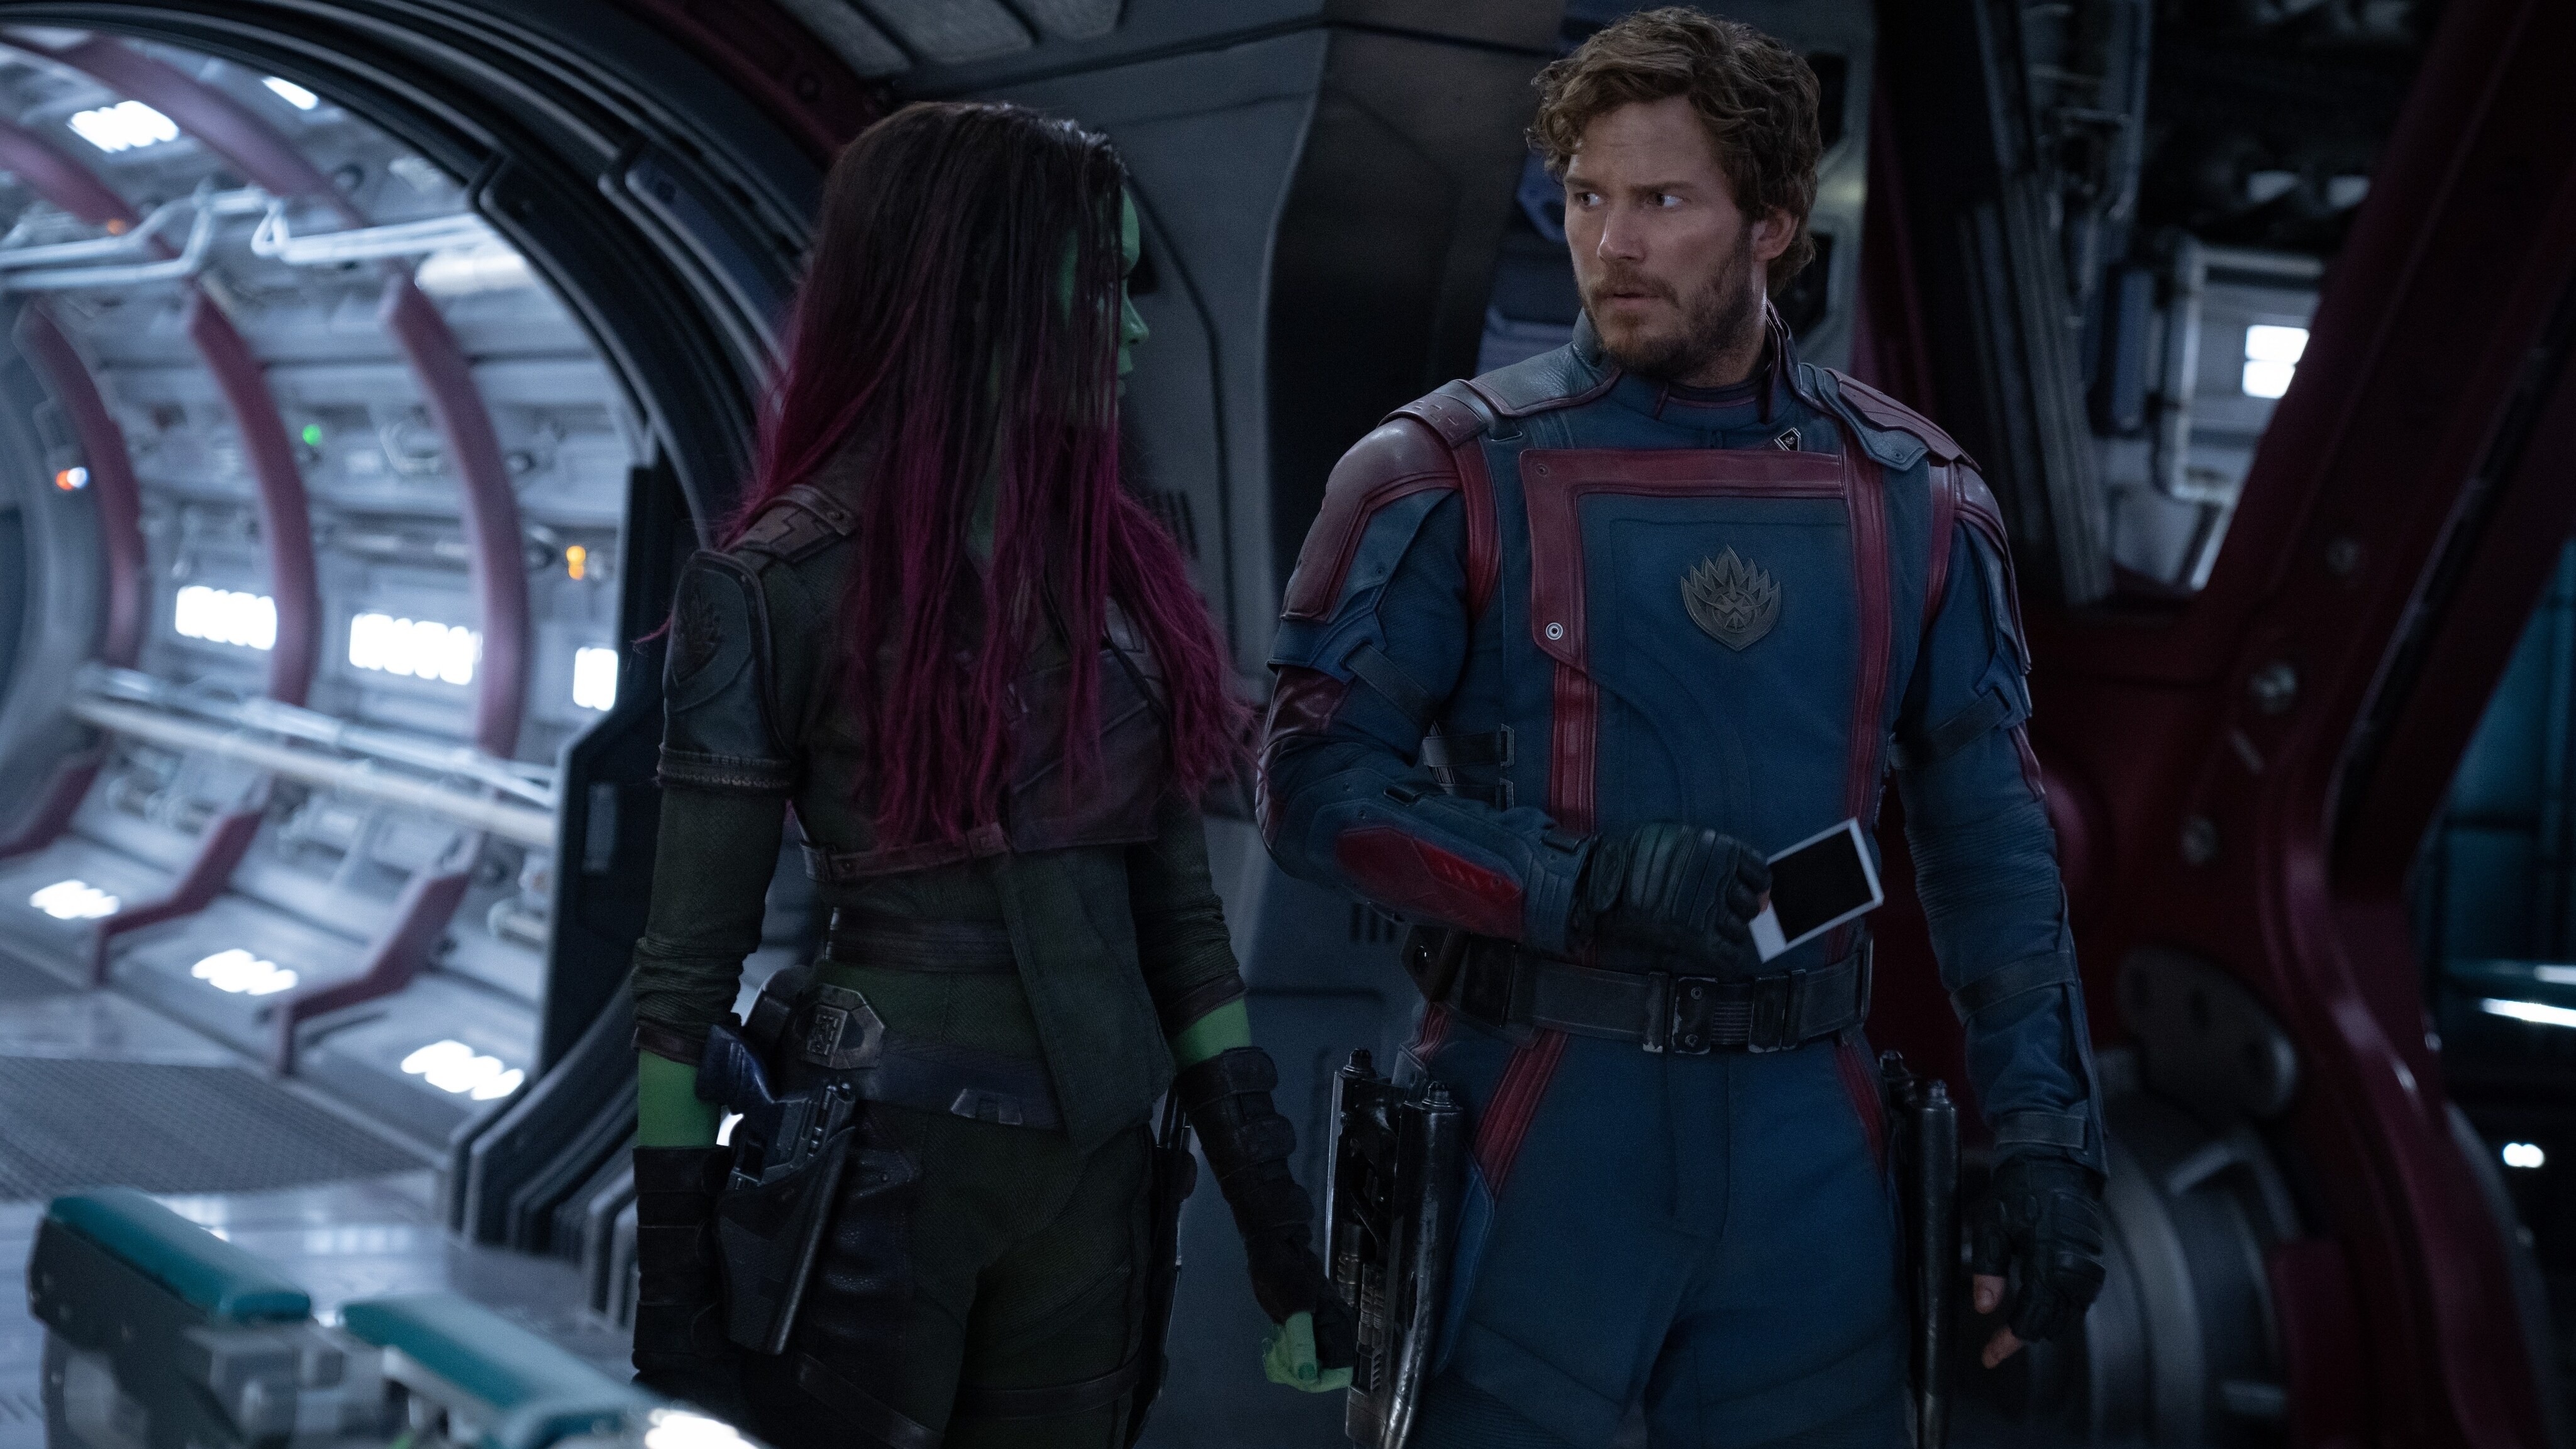 Quill and Gamora talking.